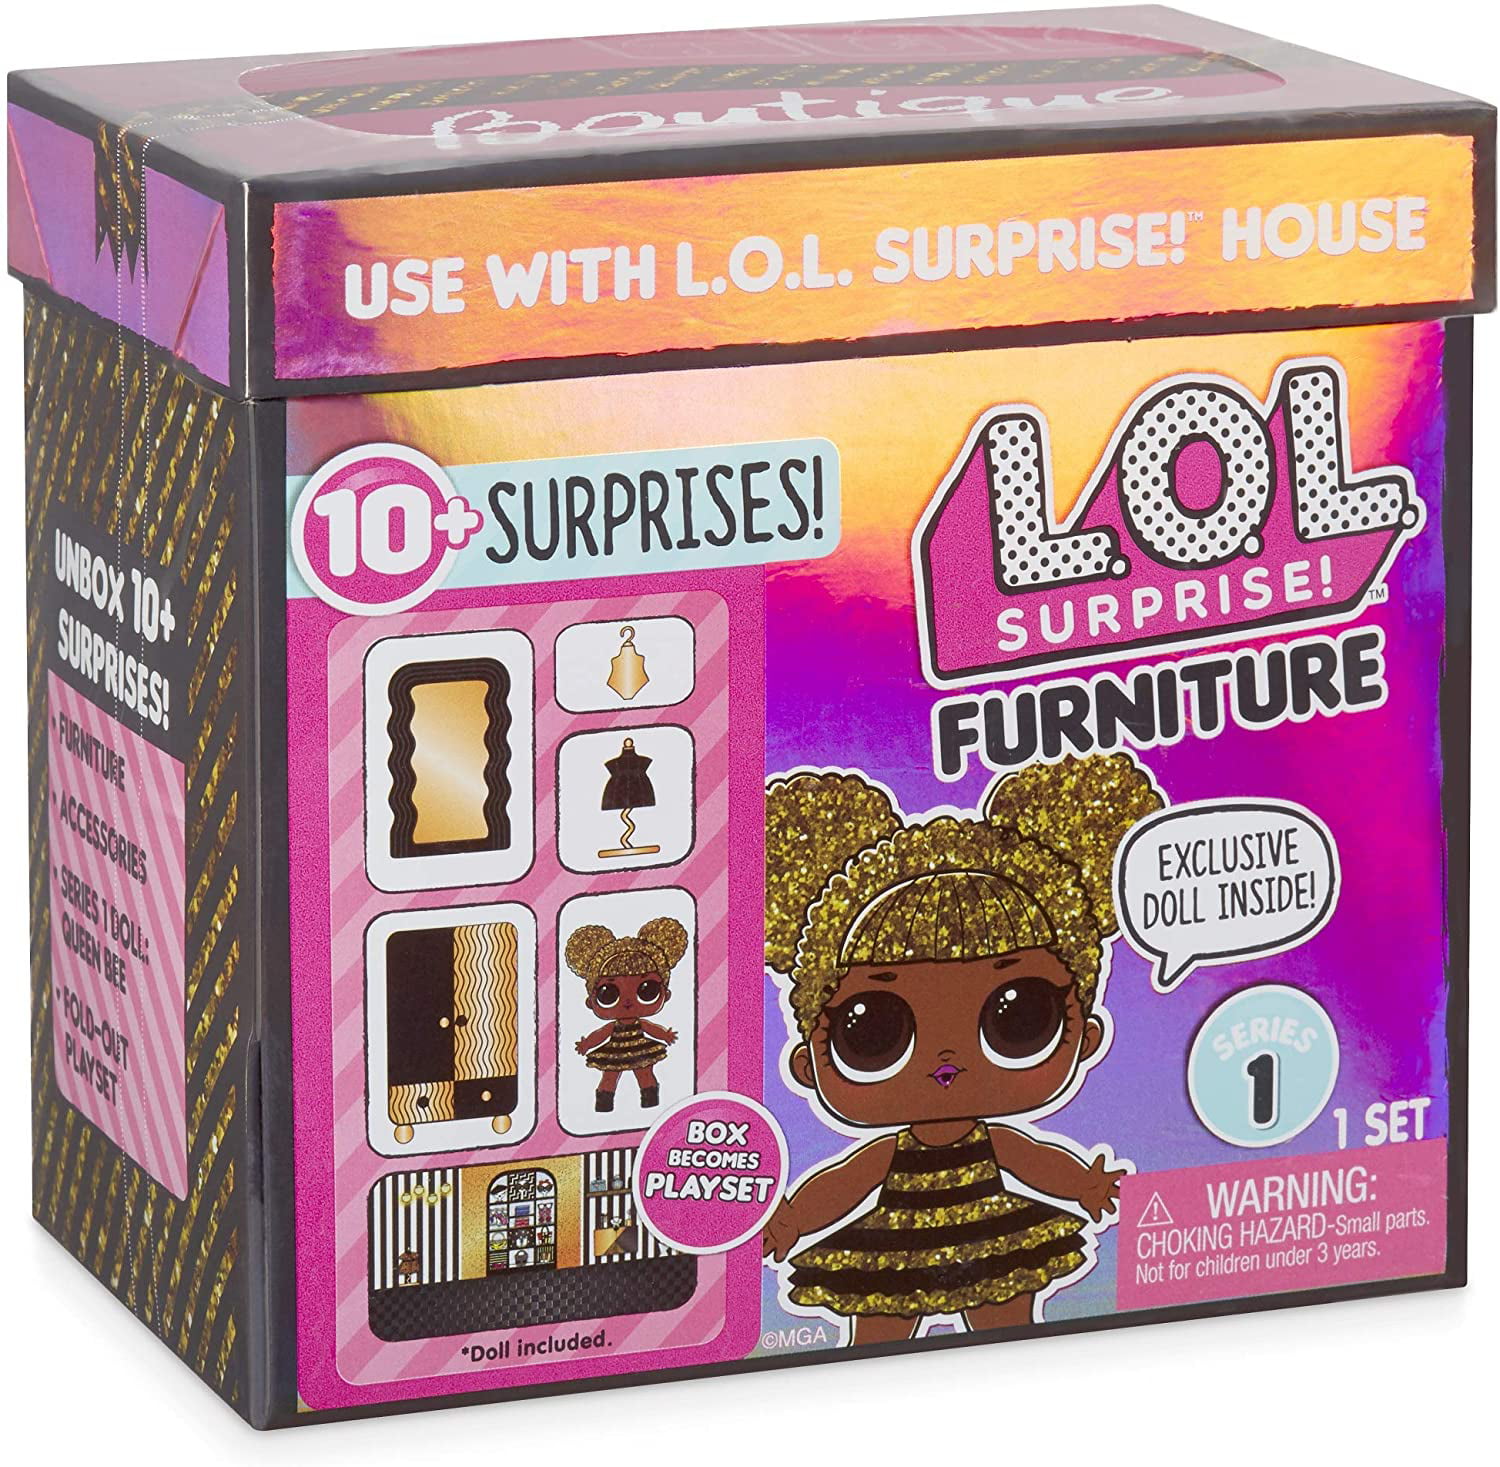 New LOL Surprise Furniture House Set Boutique Playset Exclusive Queen Bee Doll